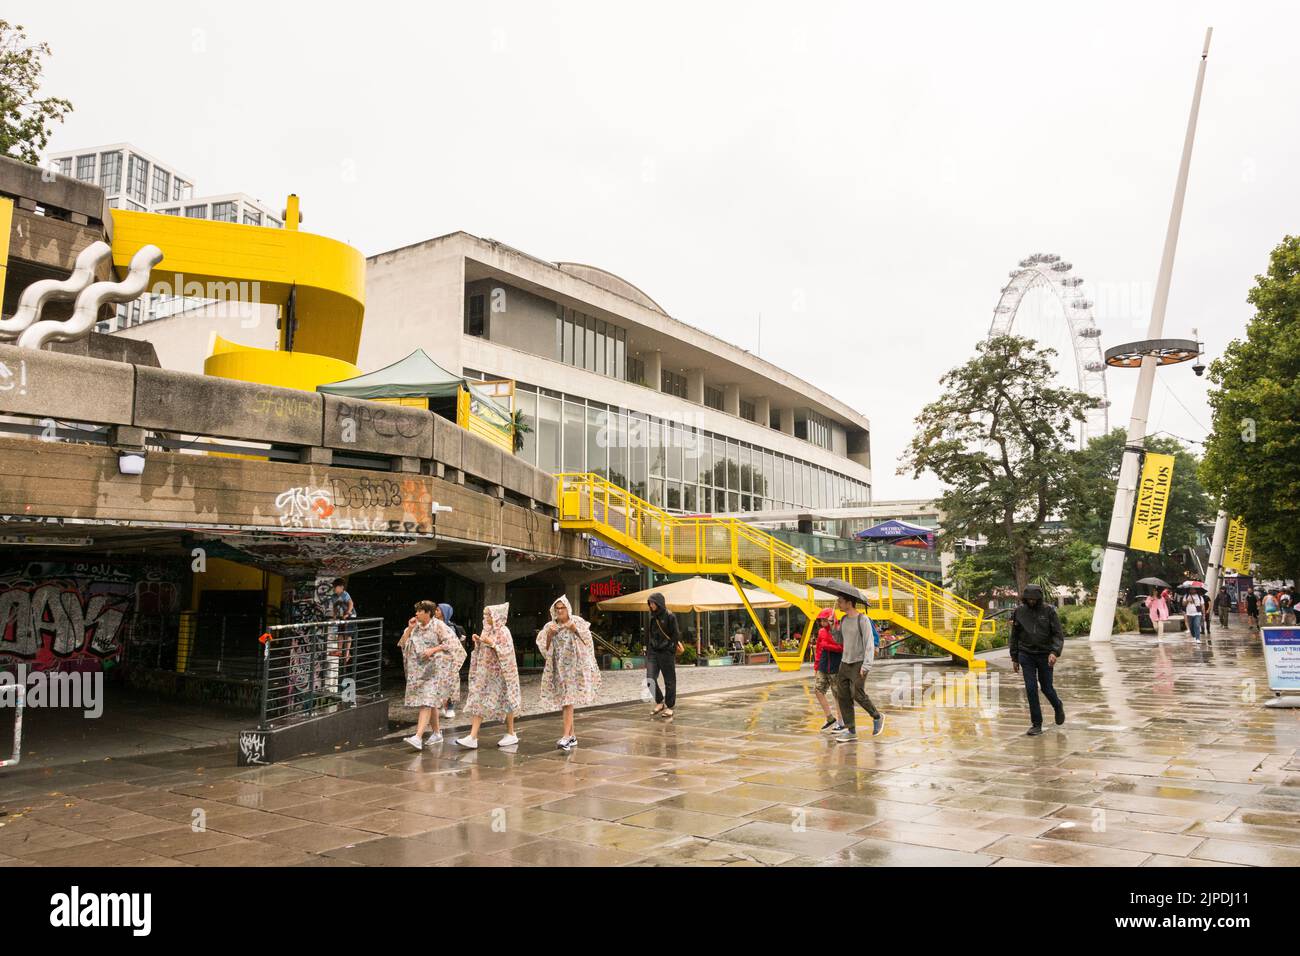 The drought and heatwave in the UK is finally over - tourists enjoying cooler weather and some rain at London's Southbank Centre, London, England, UK Stock Photo